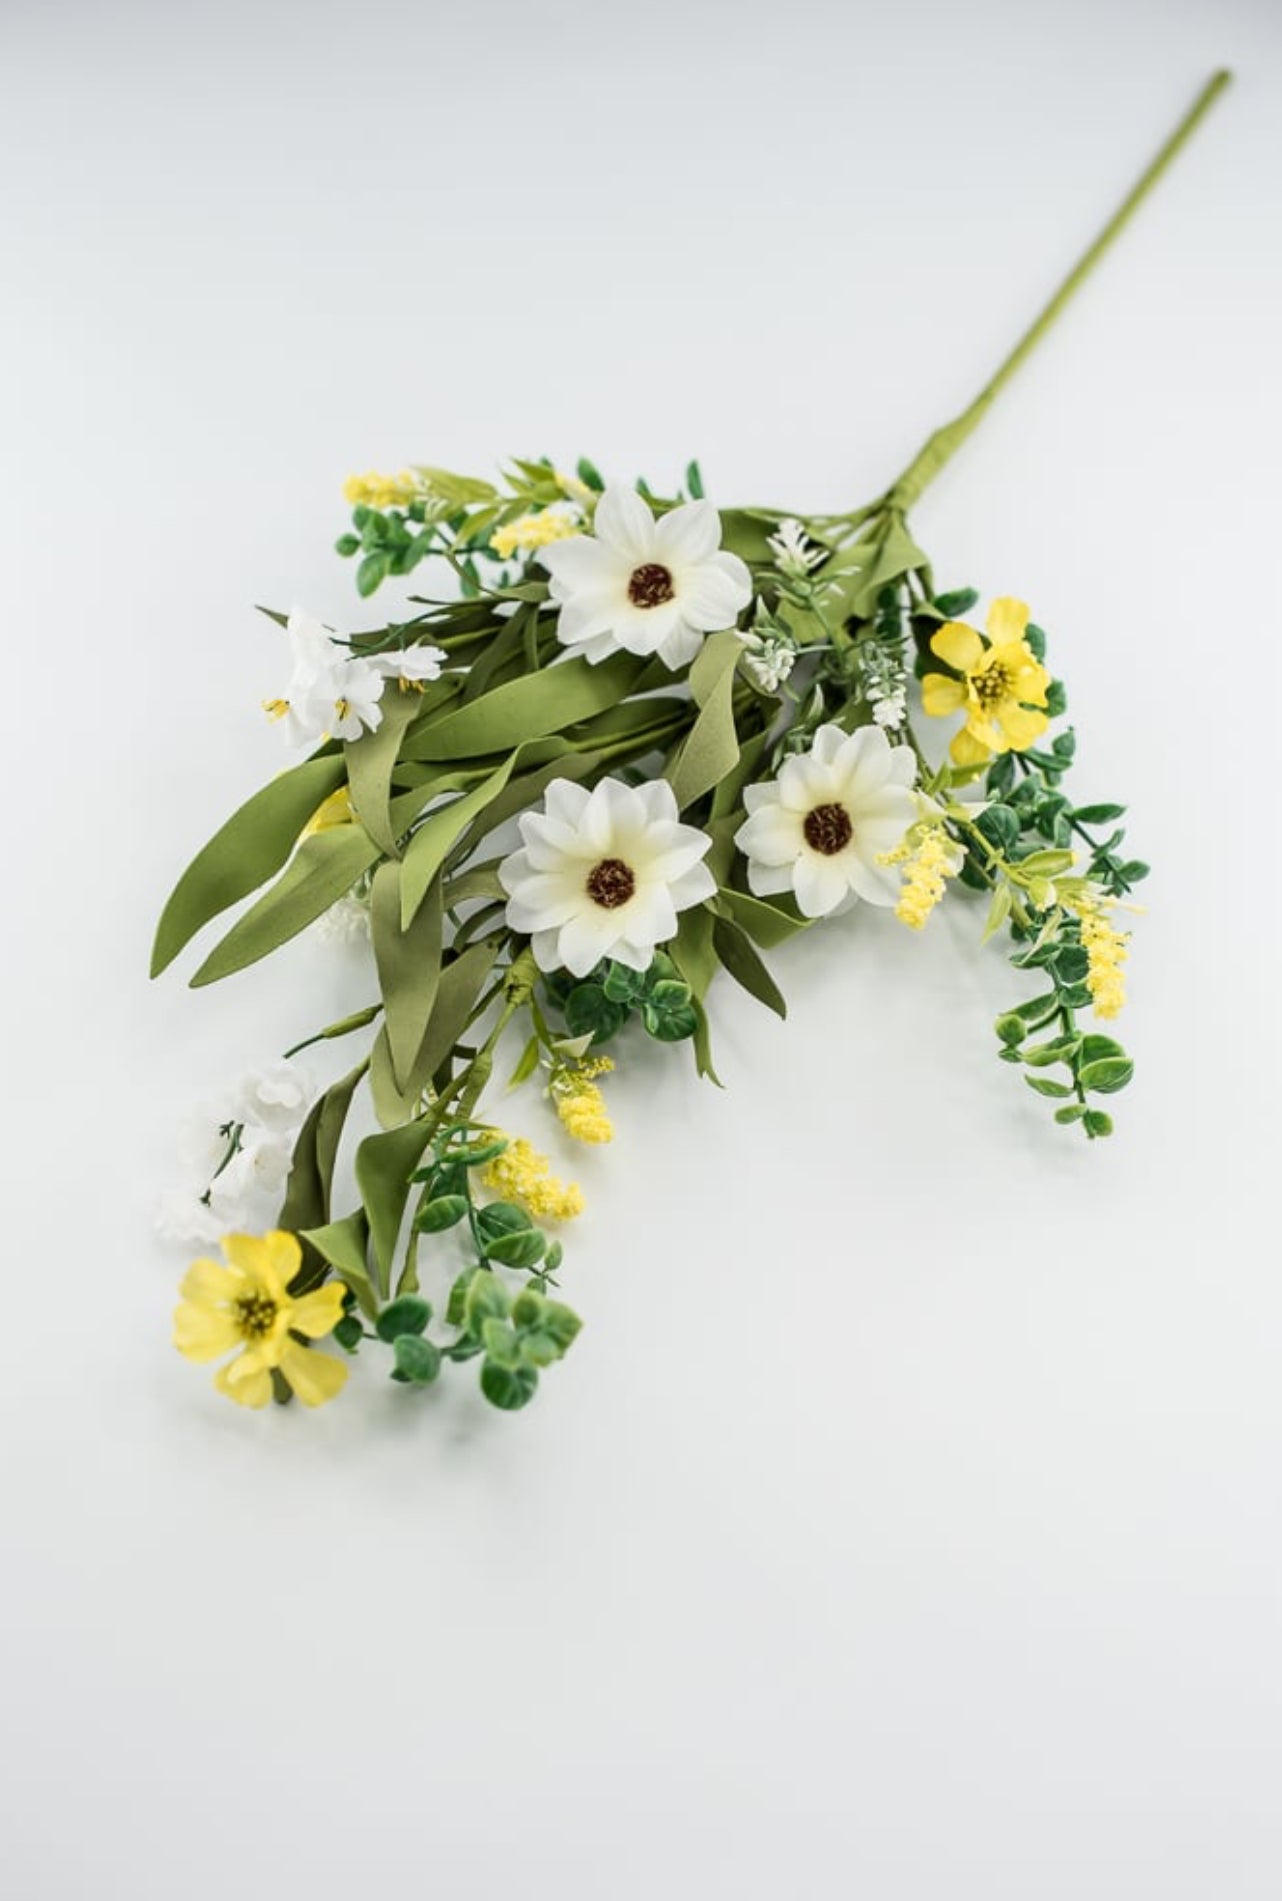 Mixed greenery and daisies flower spray - Greenery MarketArtificial Flora63892